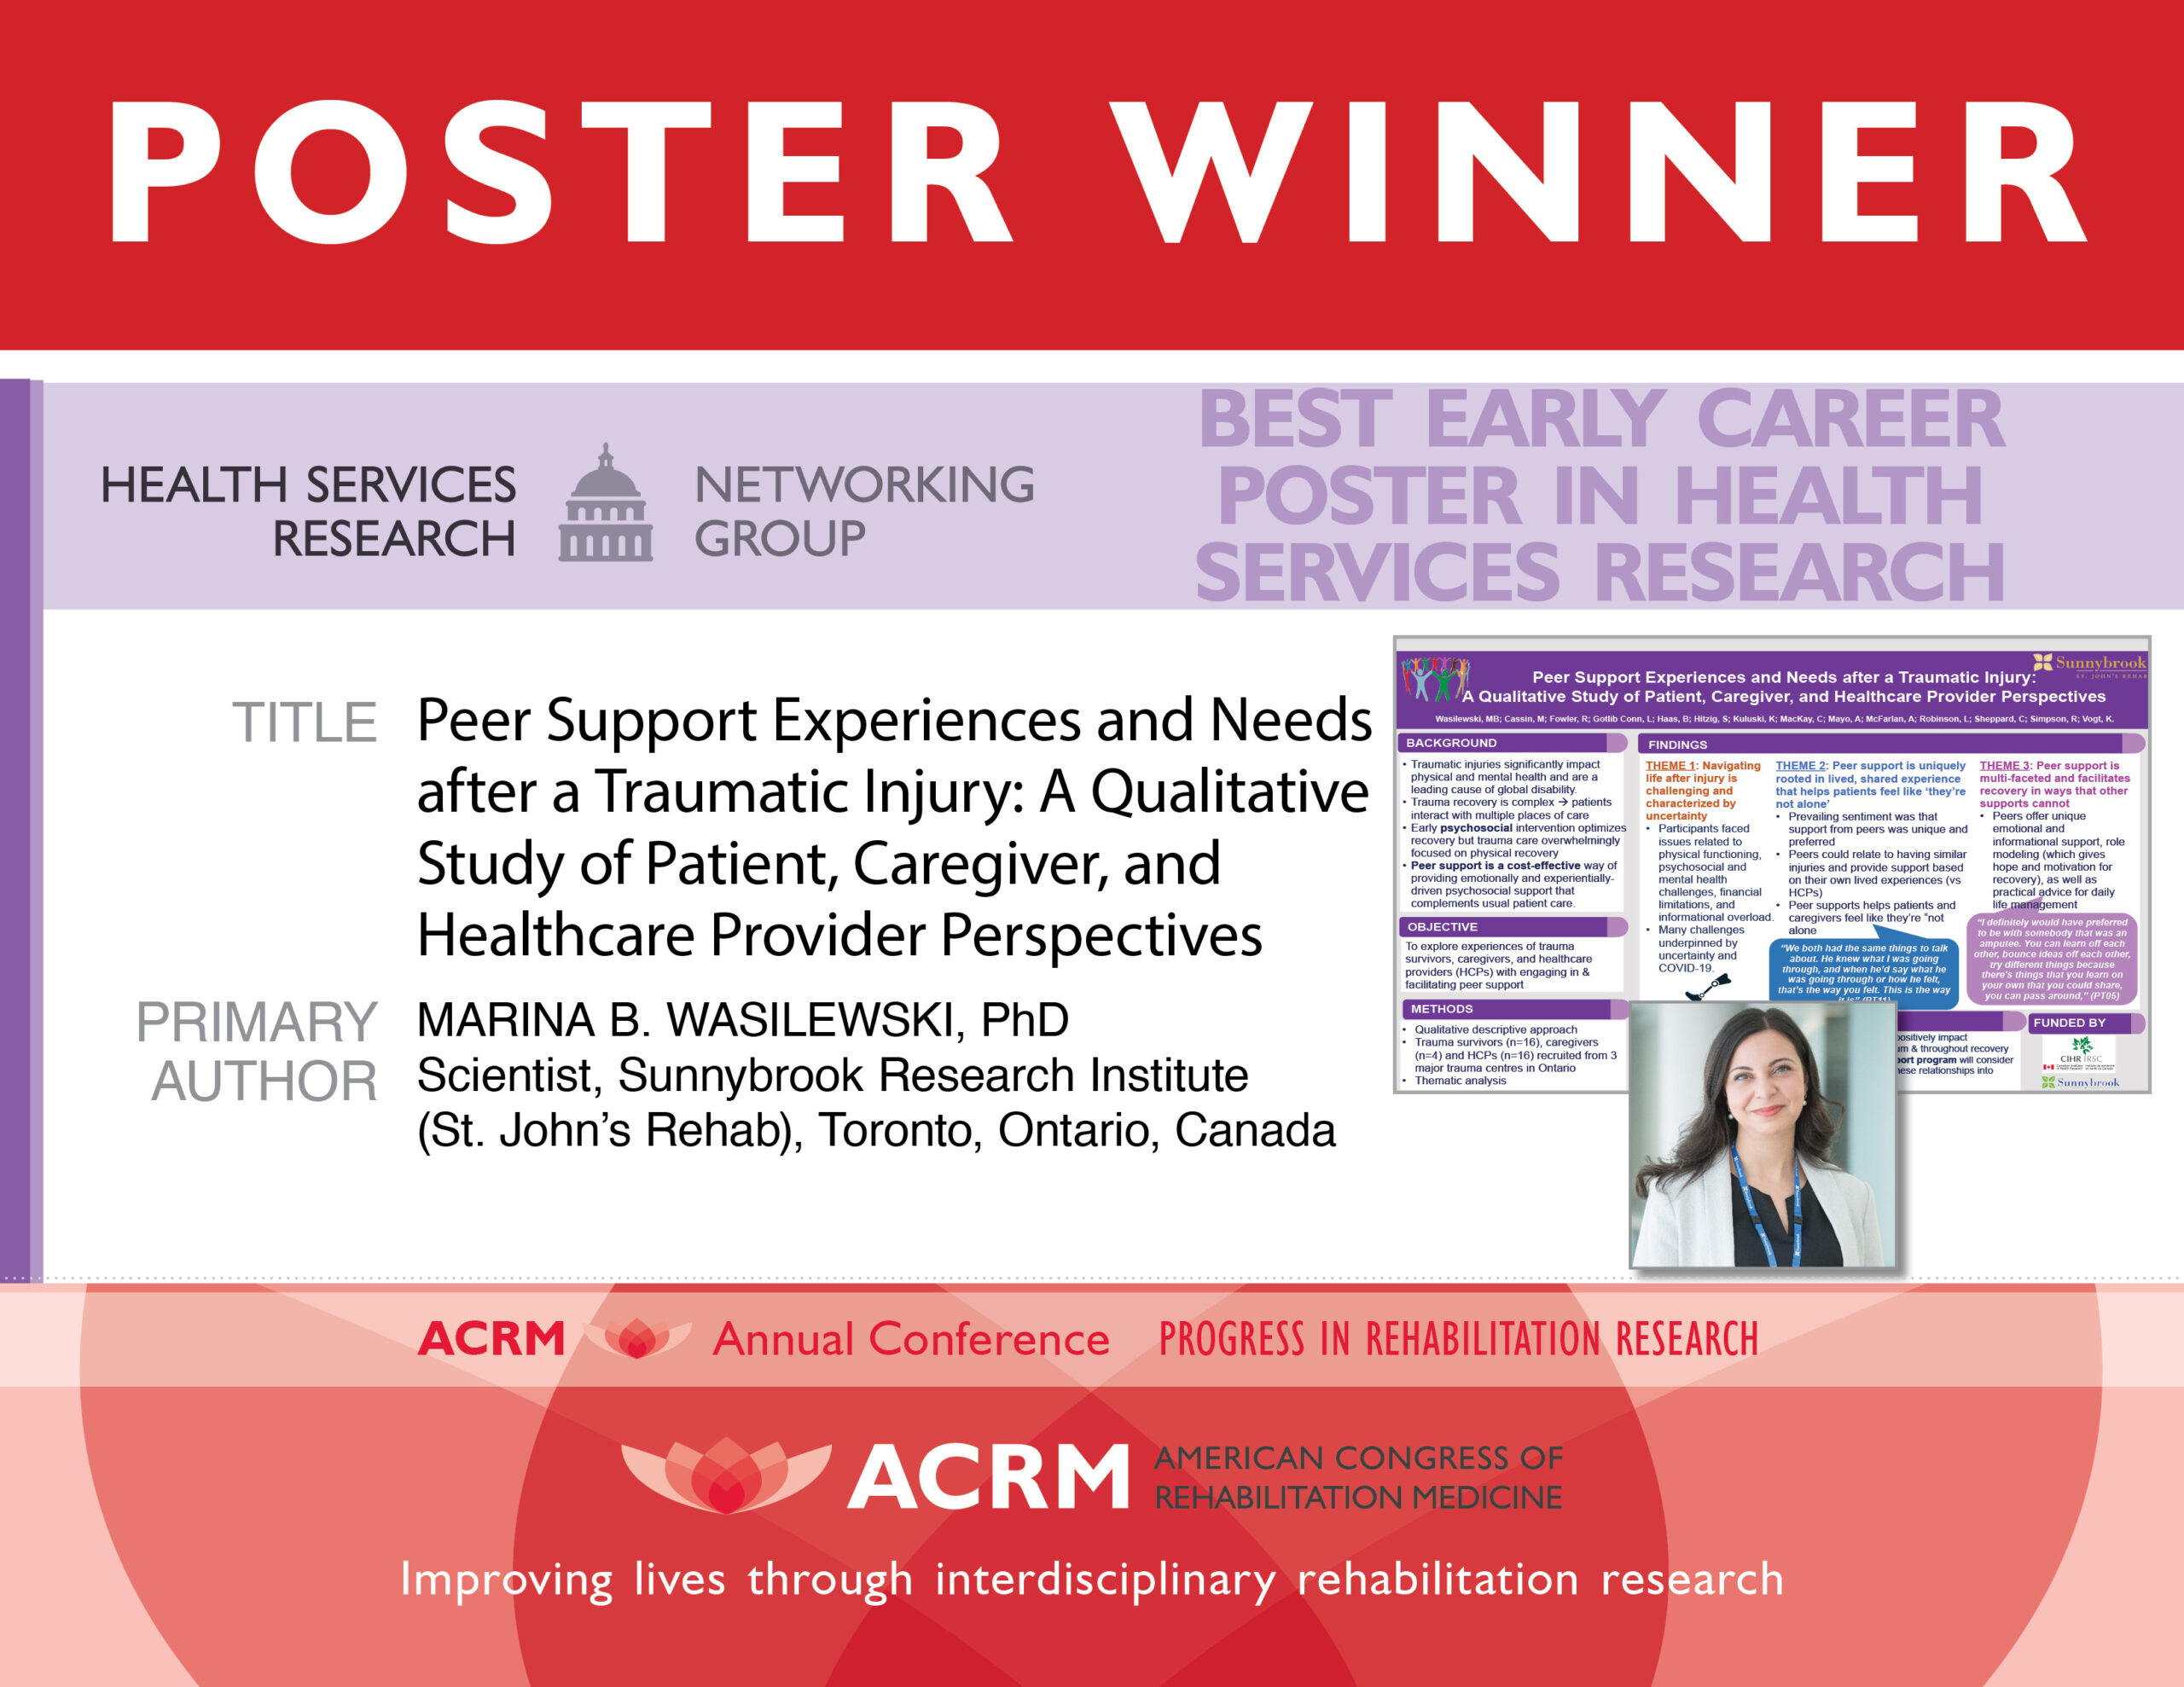 Best Overall Poster in Health Services Research